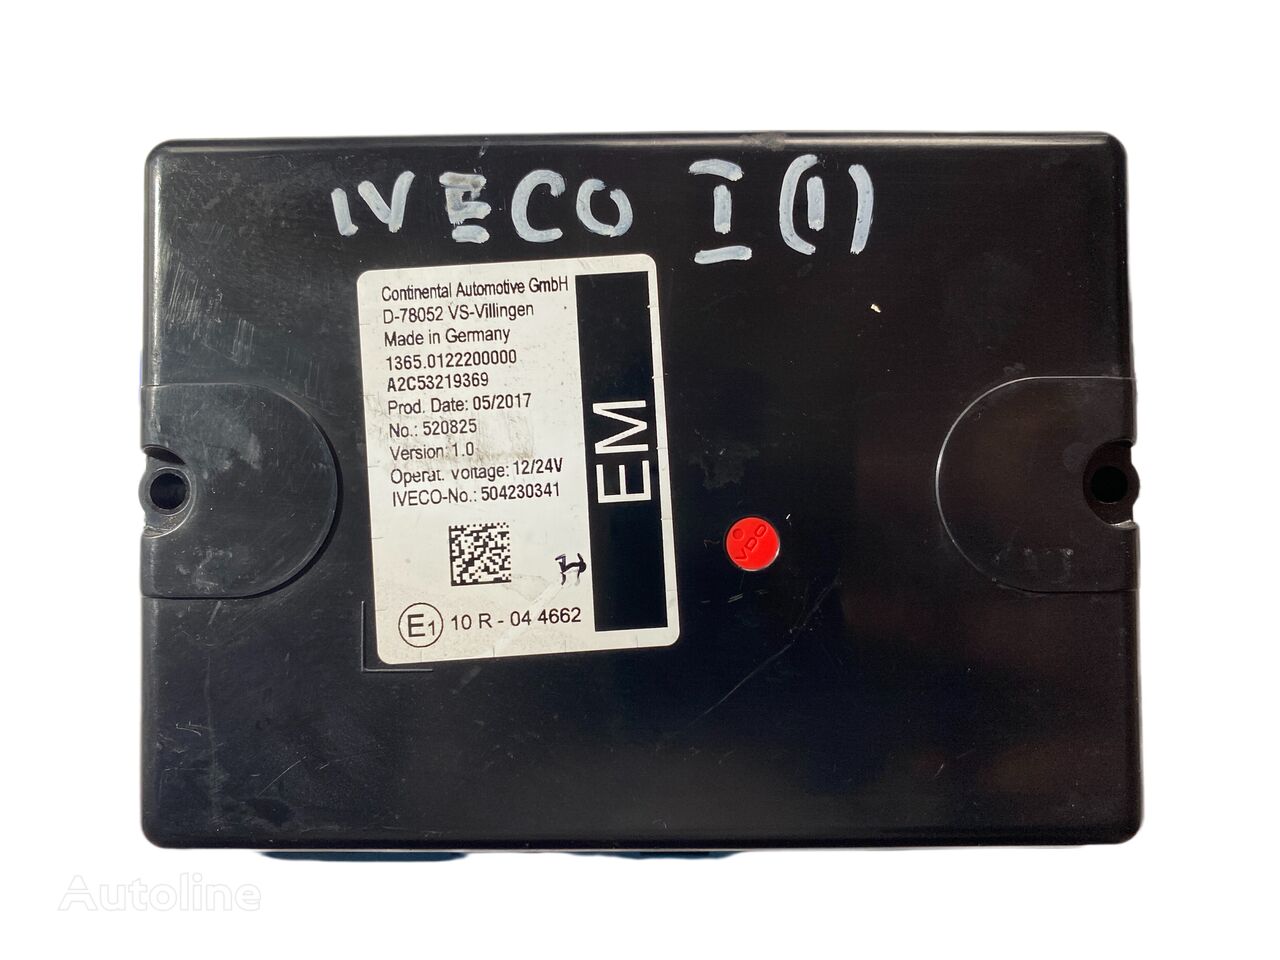 IVECO 2018 control unit for IVECO truck tractor